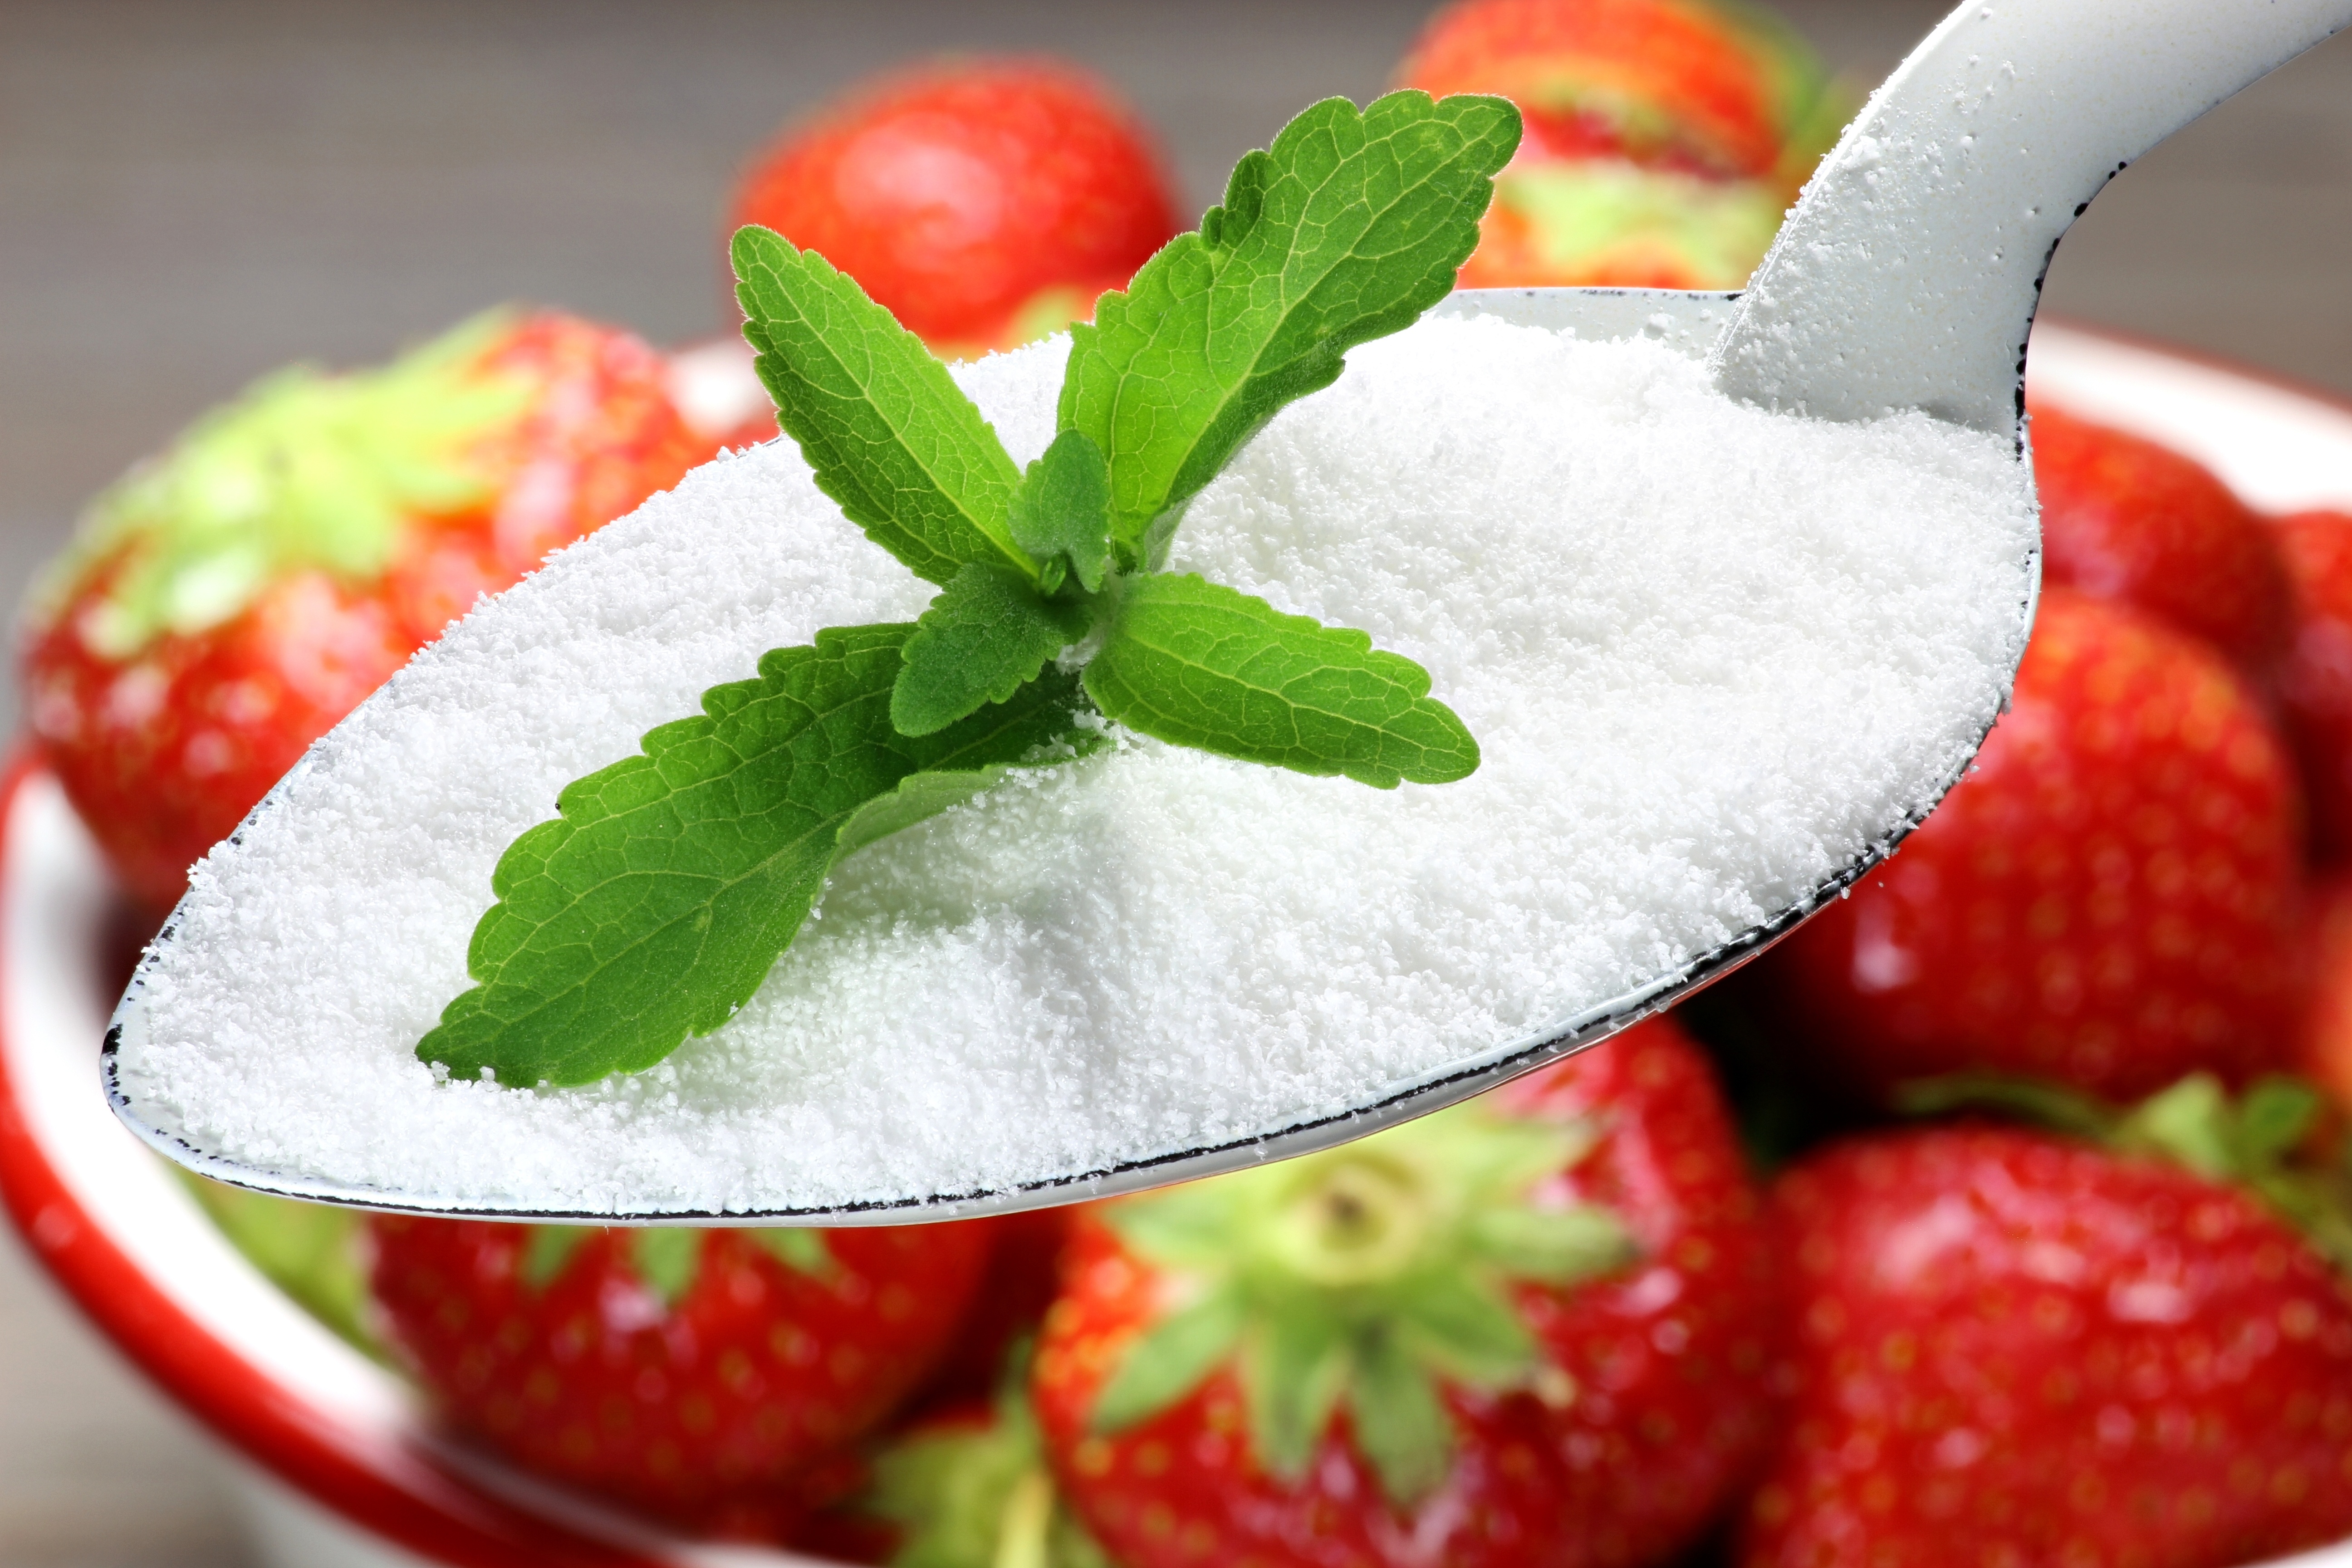 Sugar reduction without compromise: Formulations with flavour-neutral stevia